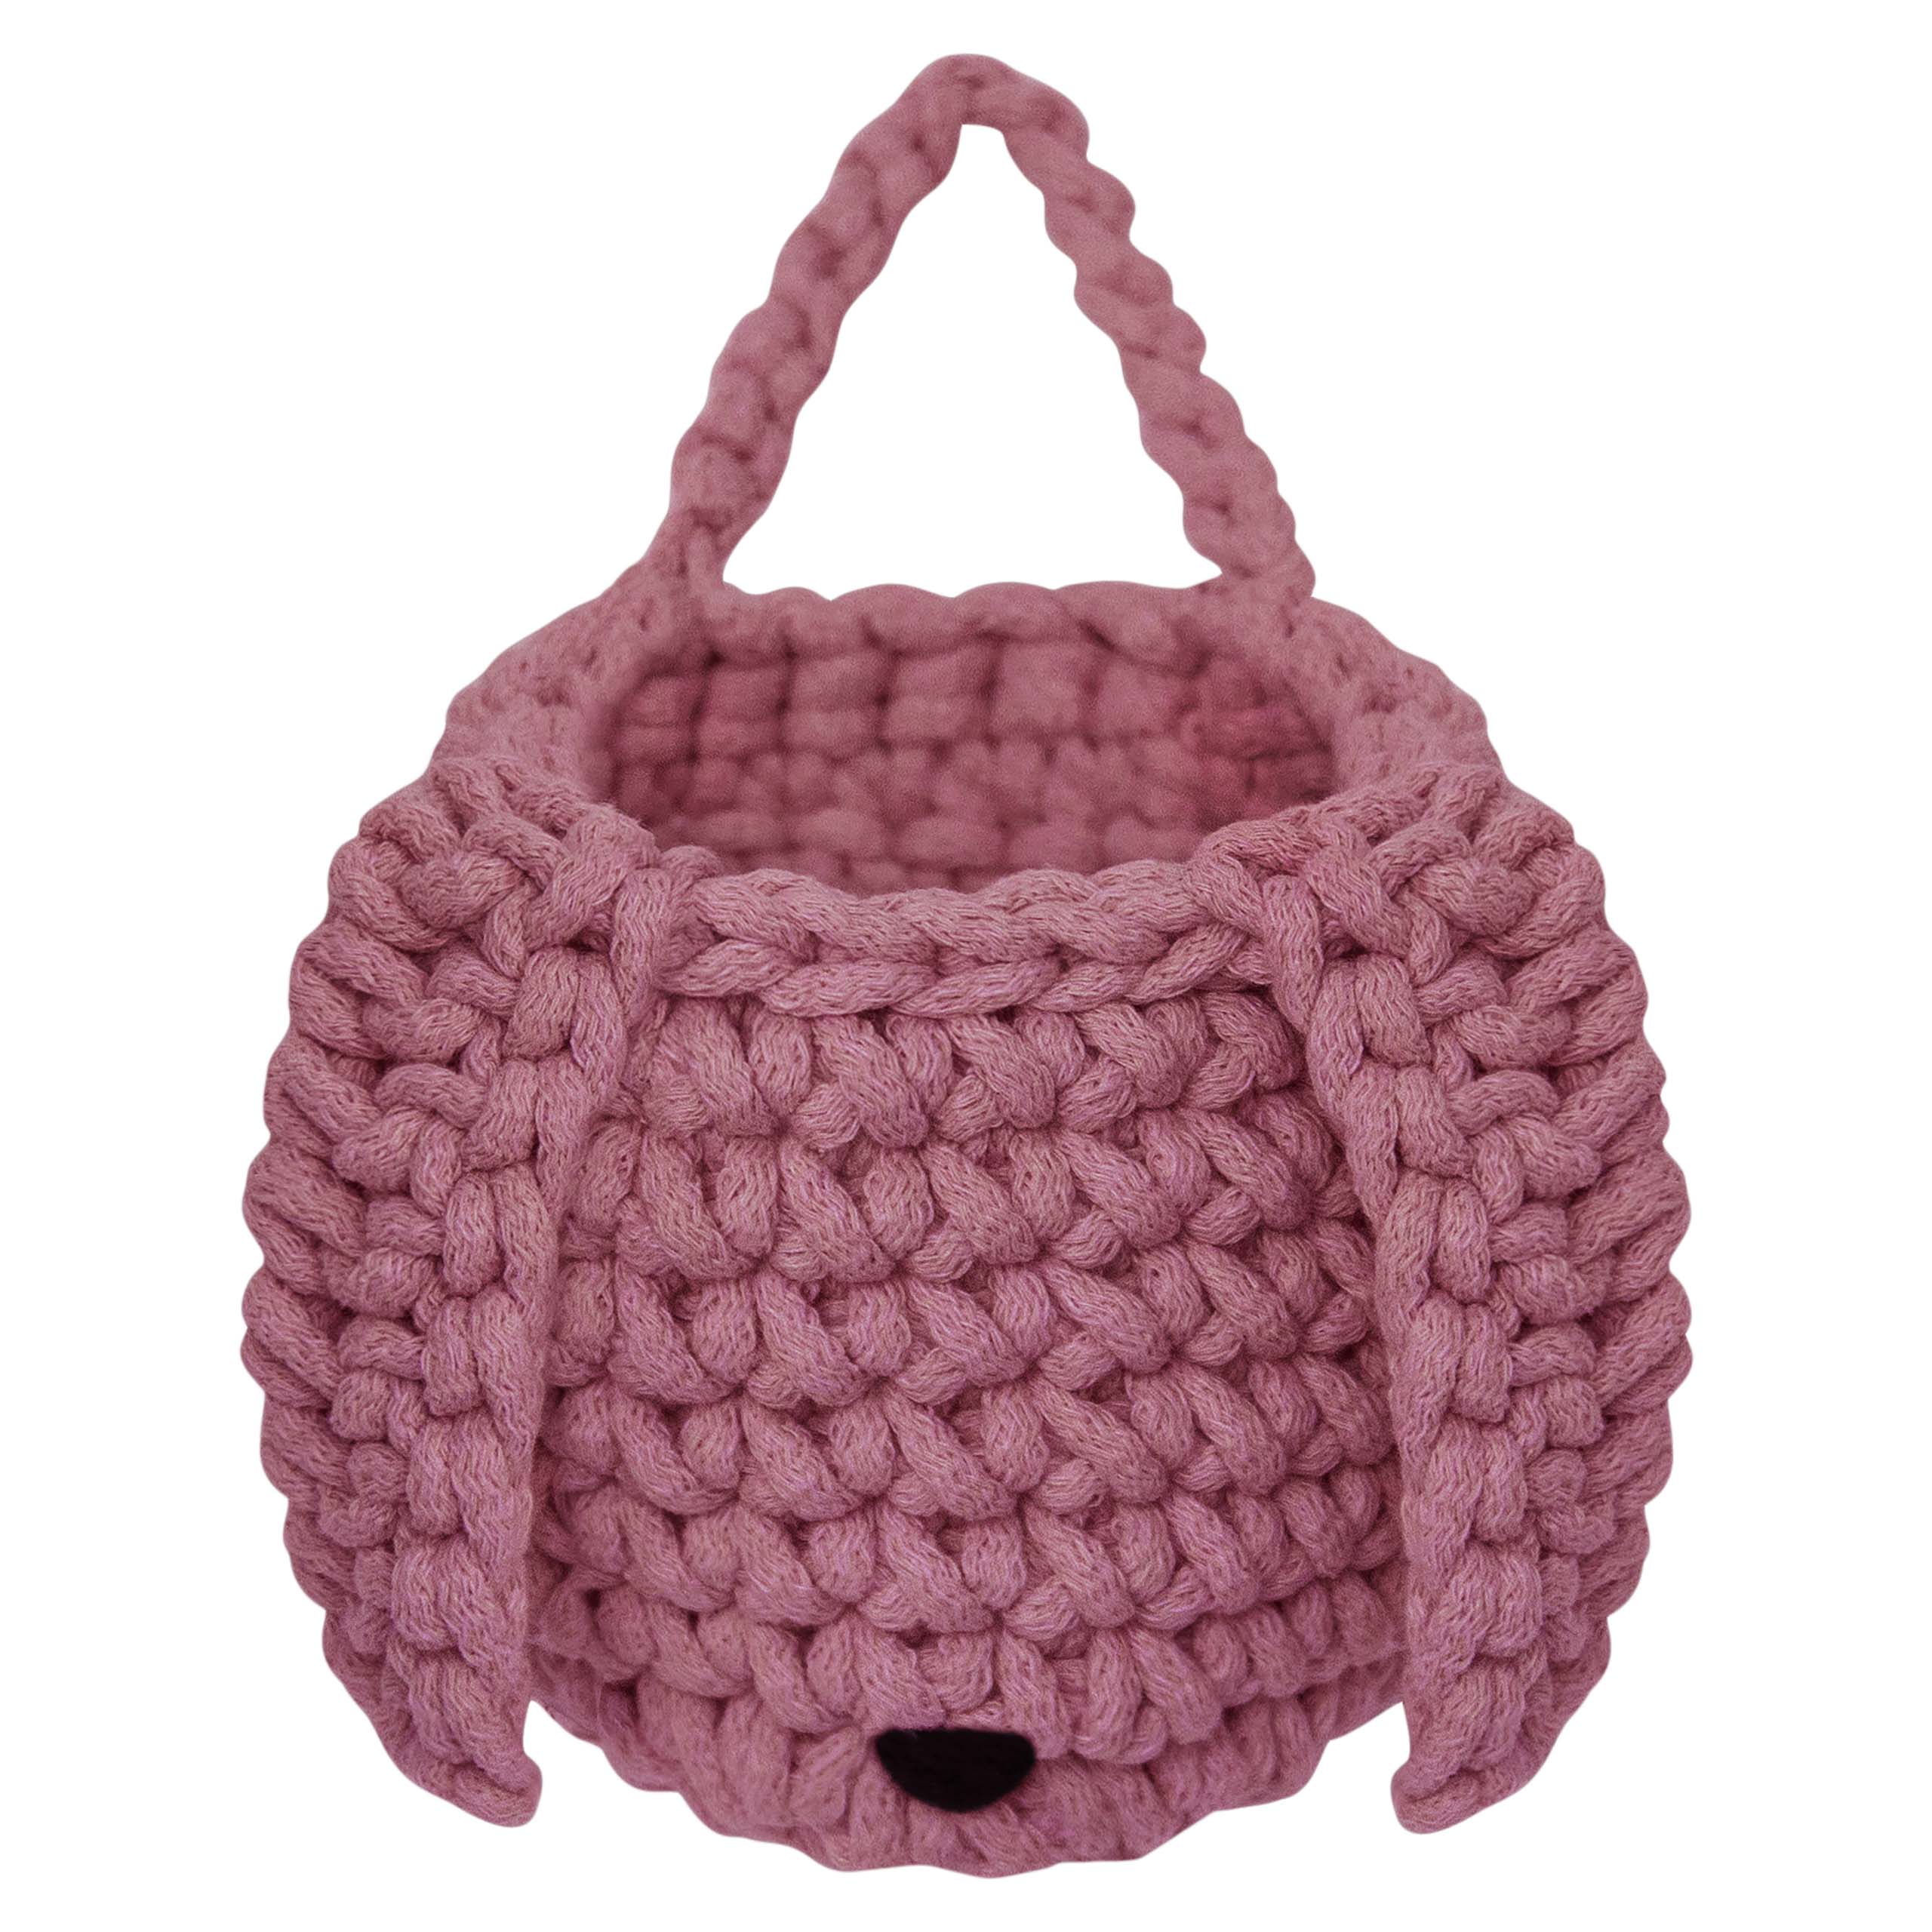 Zuri House Crochet Bunny Basket | OLD ROSE - with handle